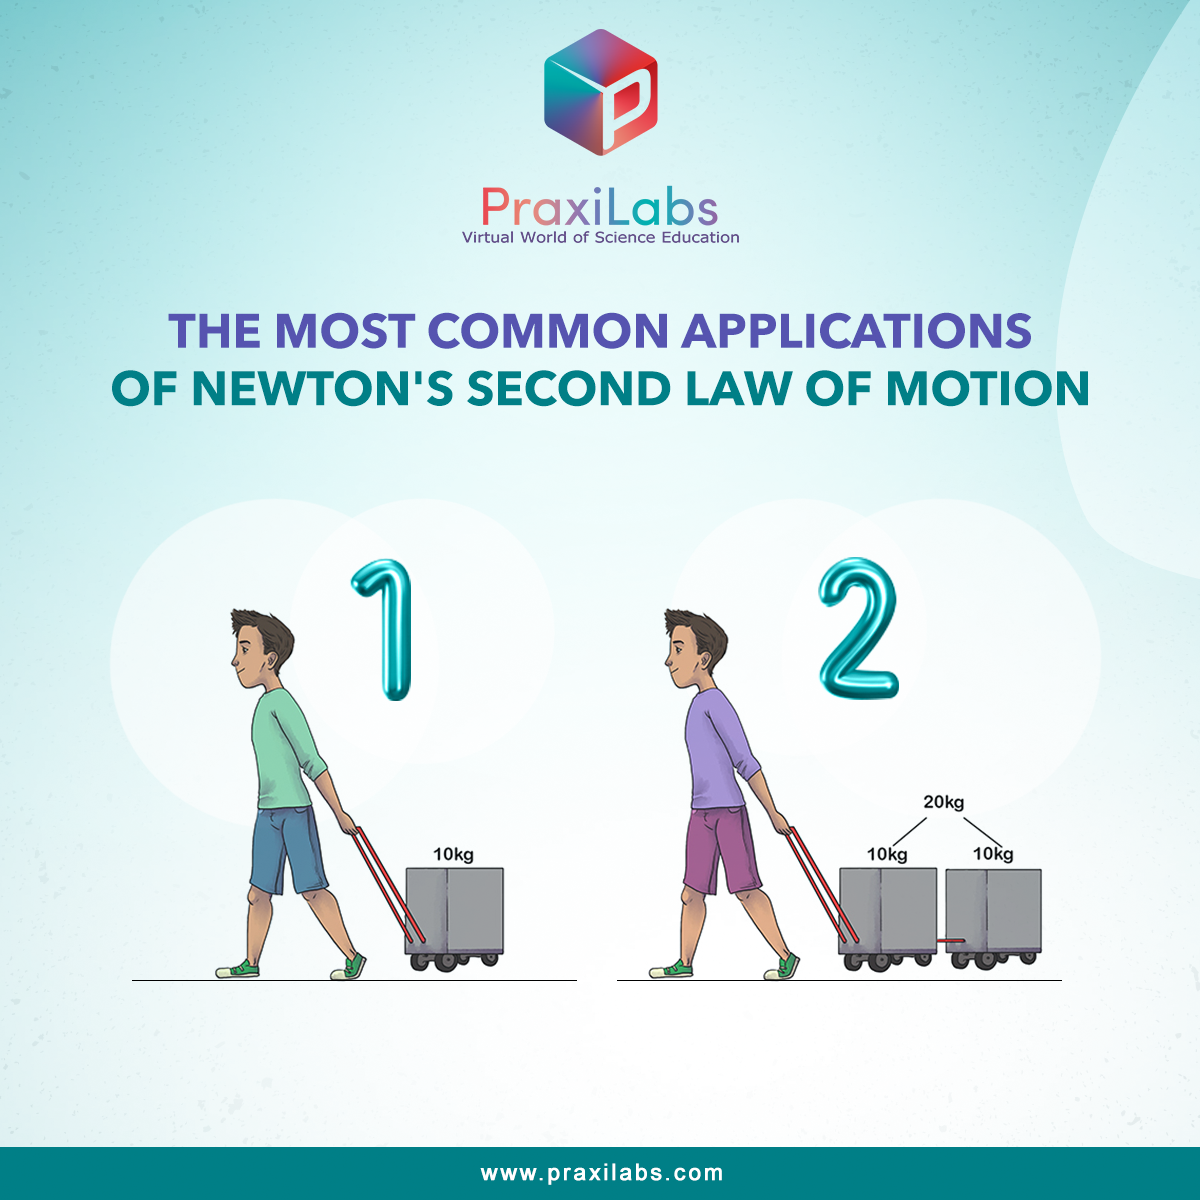 applications-of-newton-s-second-law-of-motion-praxilabs